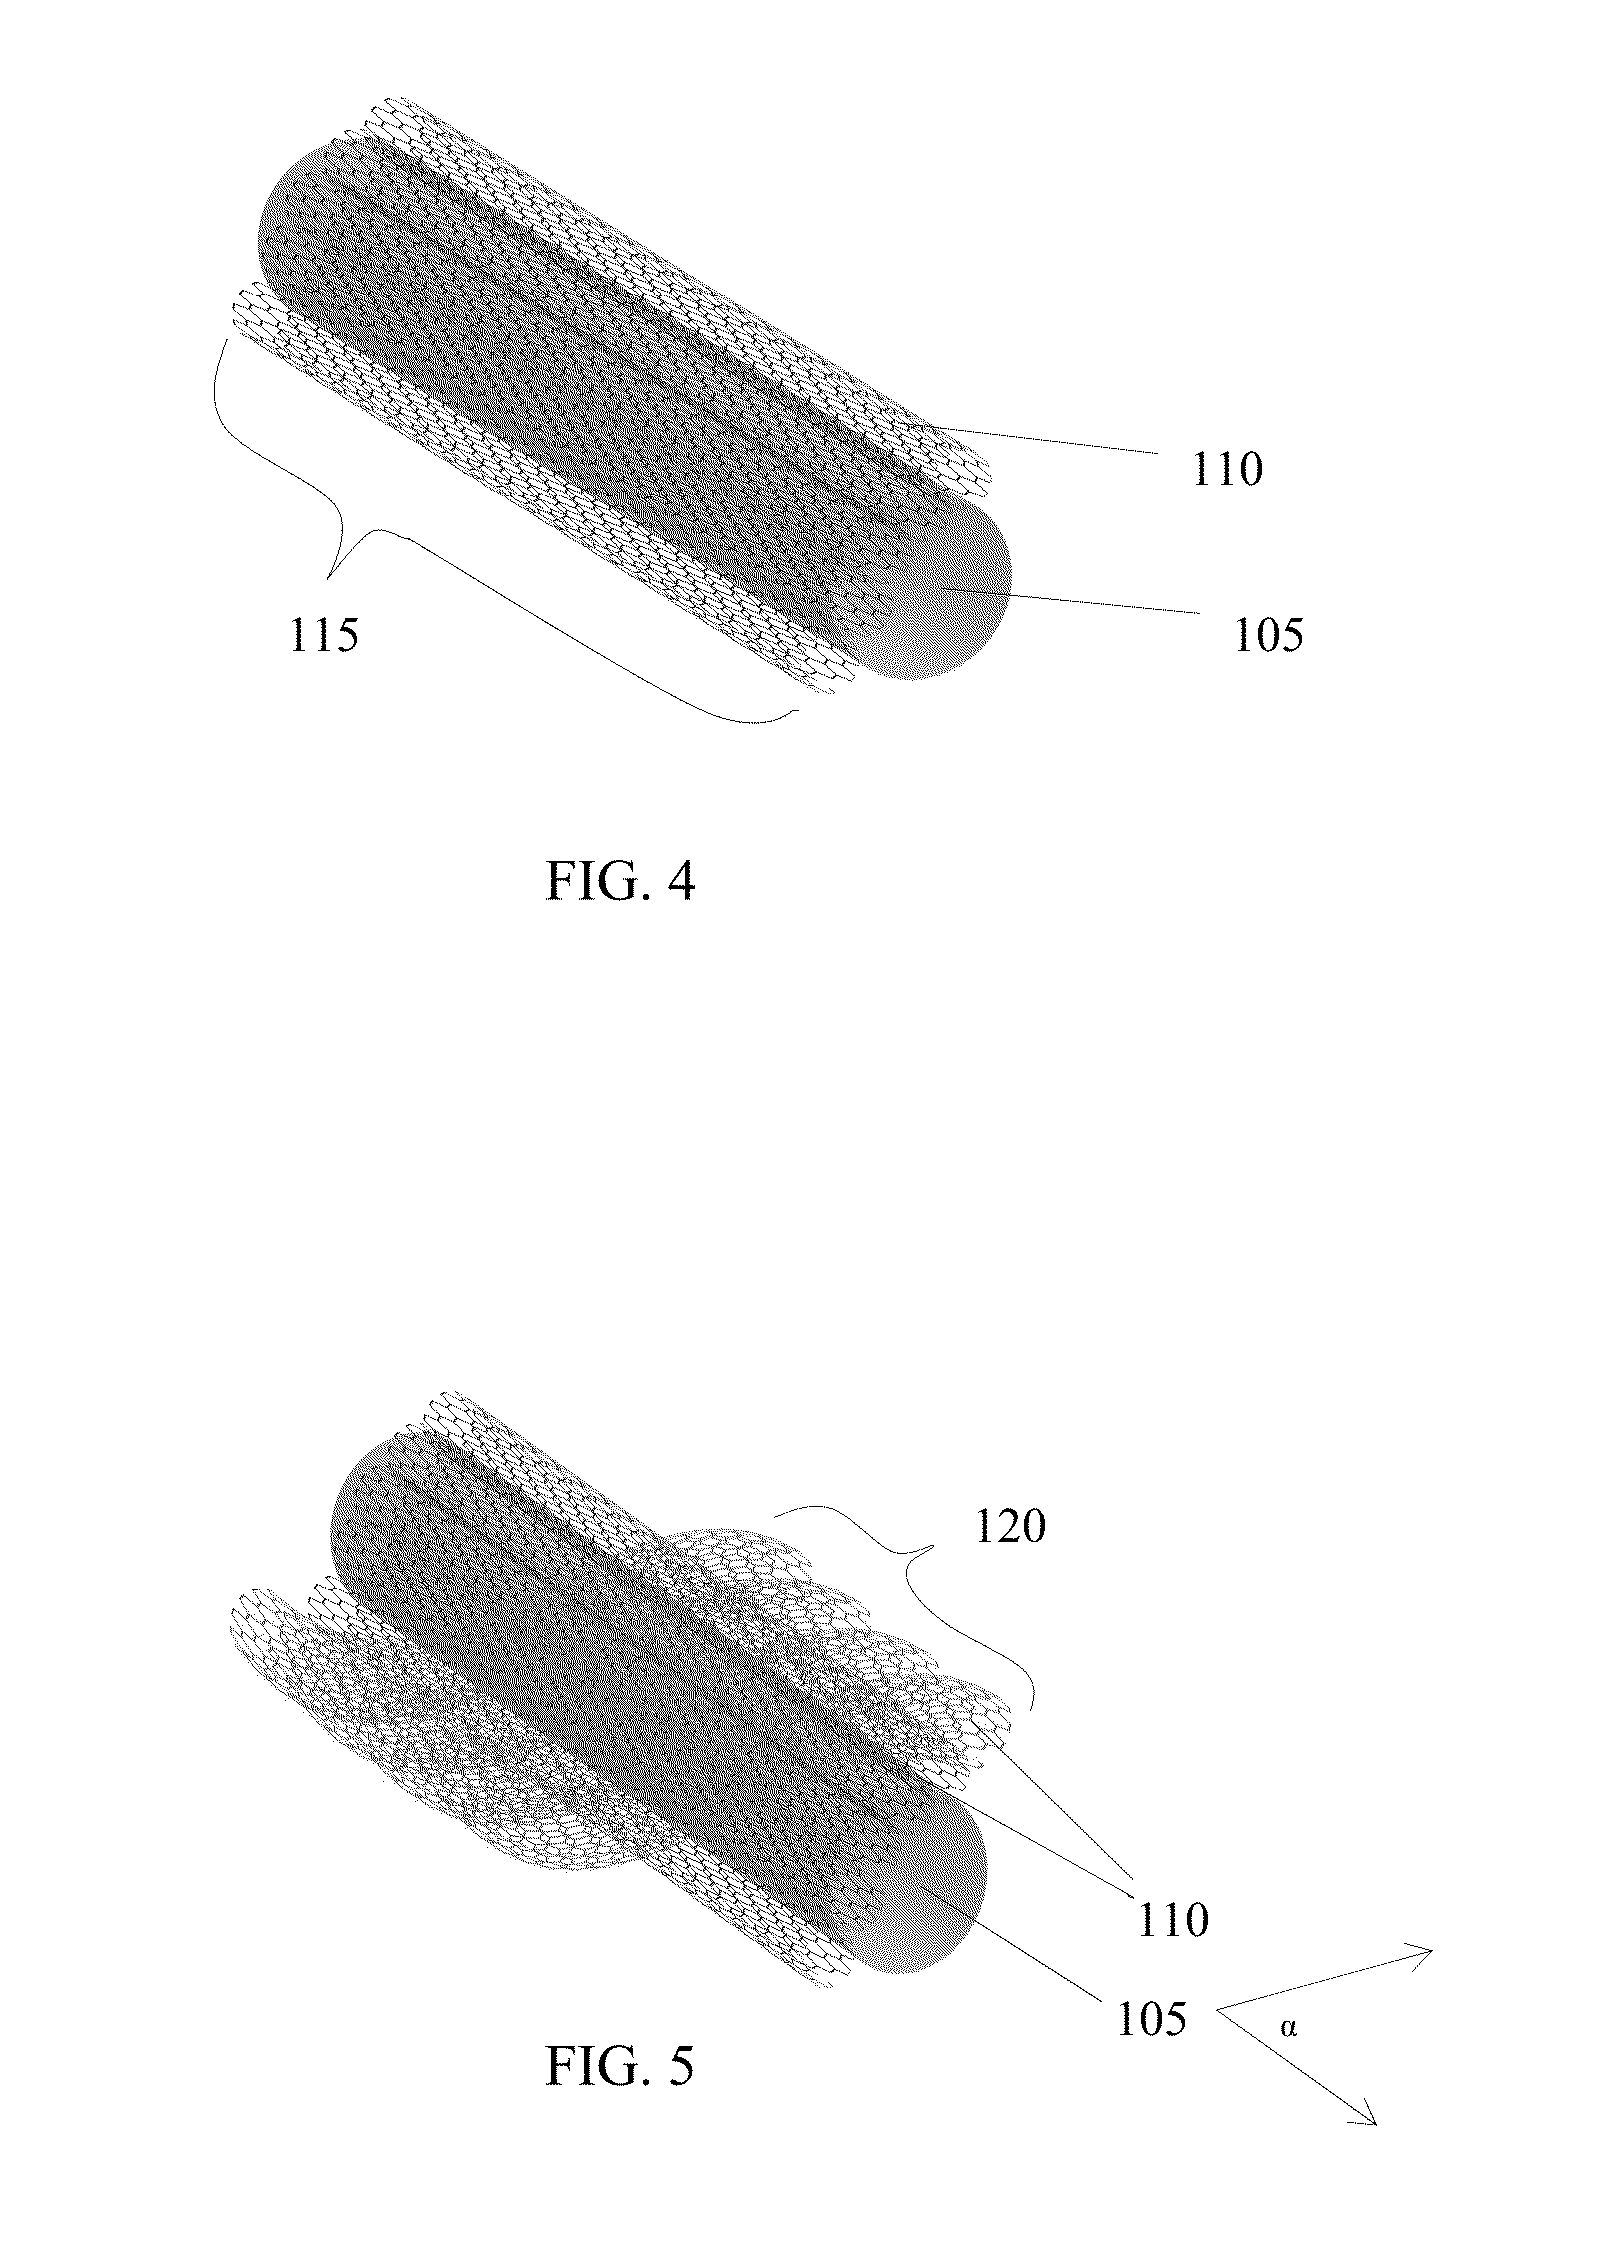 Graphene-Based Threads, Fibers or Yarns with Nth-Order Layers and Twisting and Methods of Fabricating Same